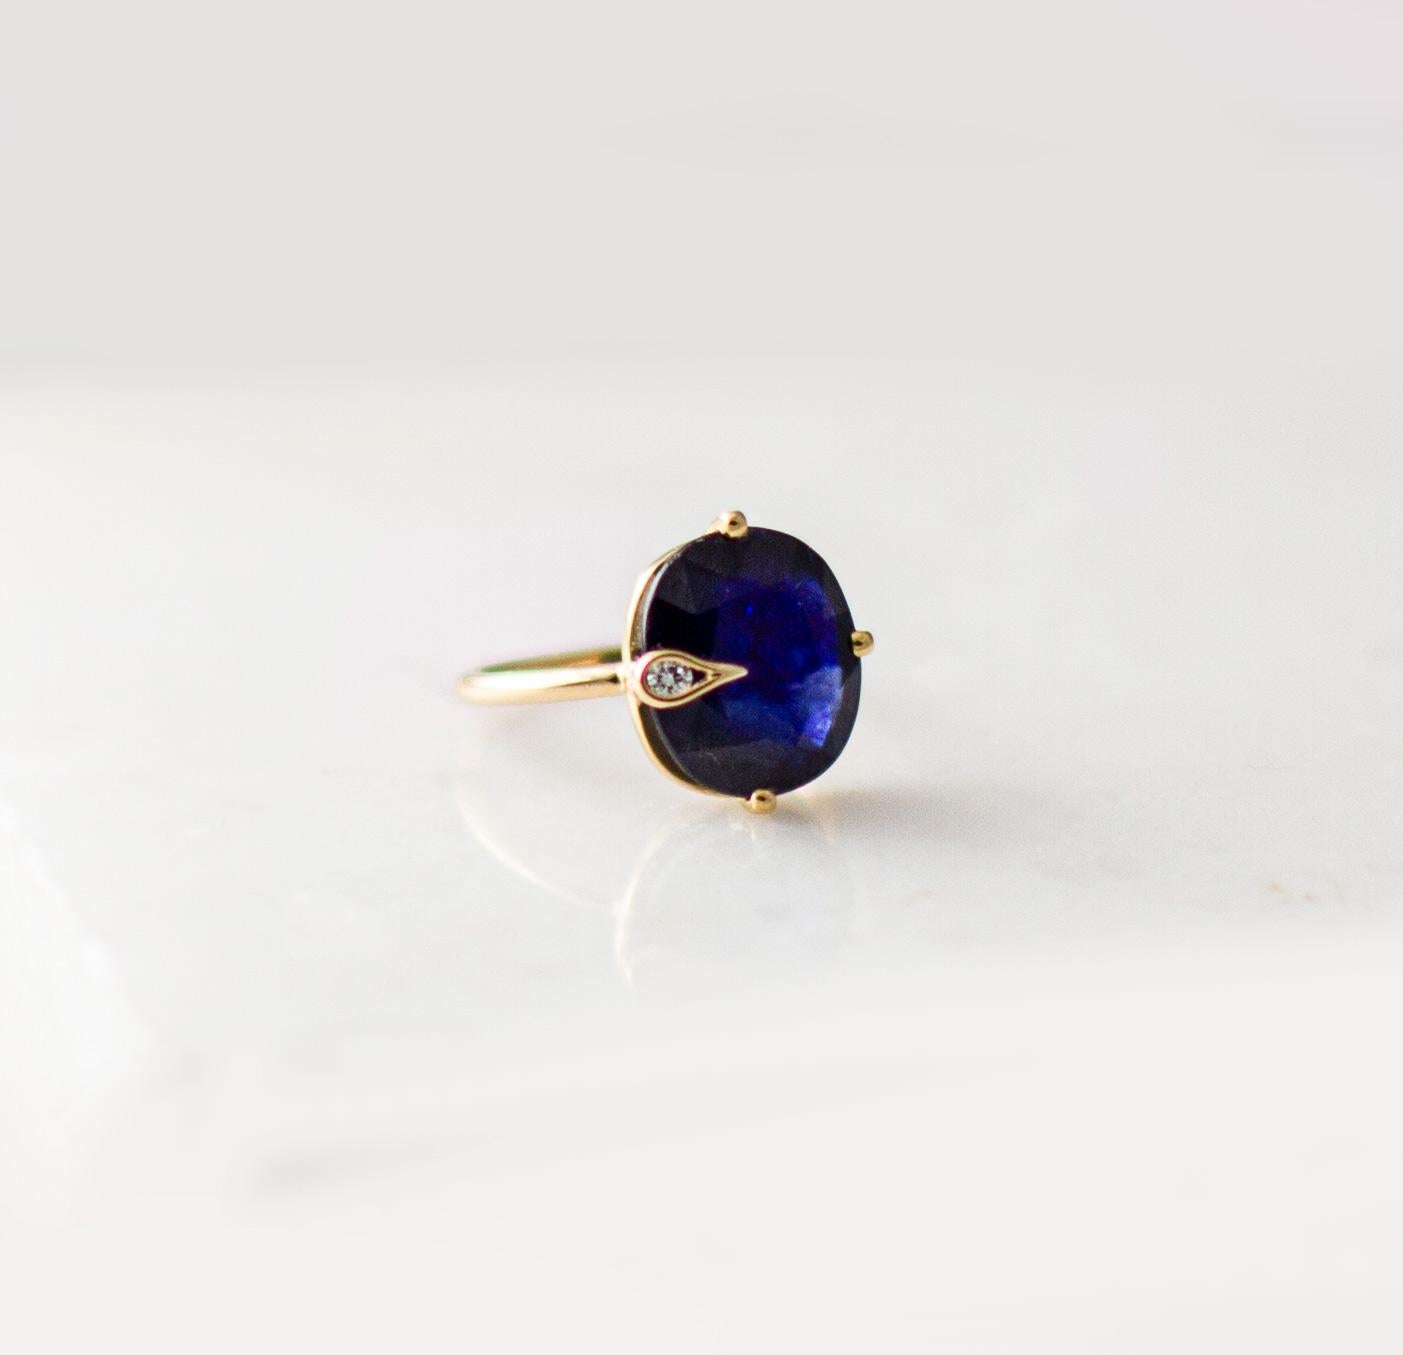 This contemporary Peacock ring is in 18 karat yellow gold with unheated natural cushion cut blue sapphire, 2,55 carats, 0,35x0,3 inches / 9x7,8 mm, and diamond. The ring is easy to wear, and the gem catches eye's attention. 
We use top natural